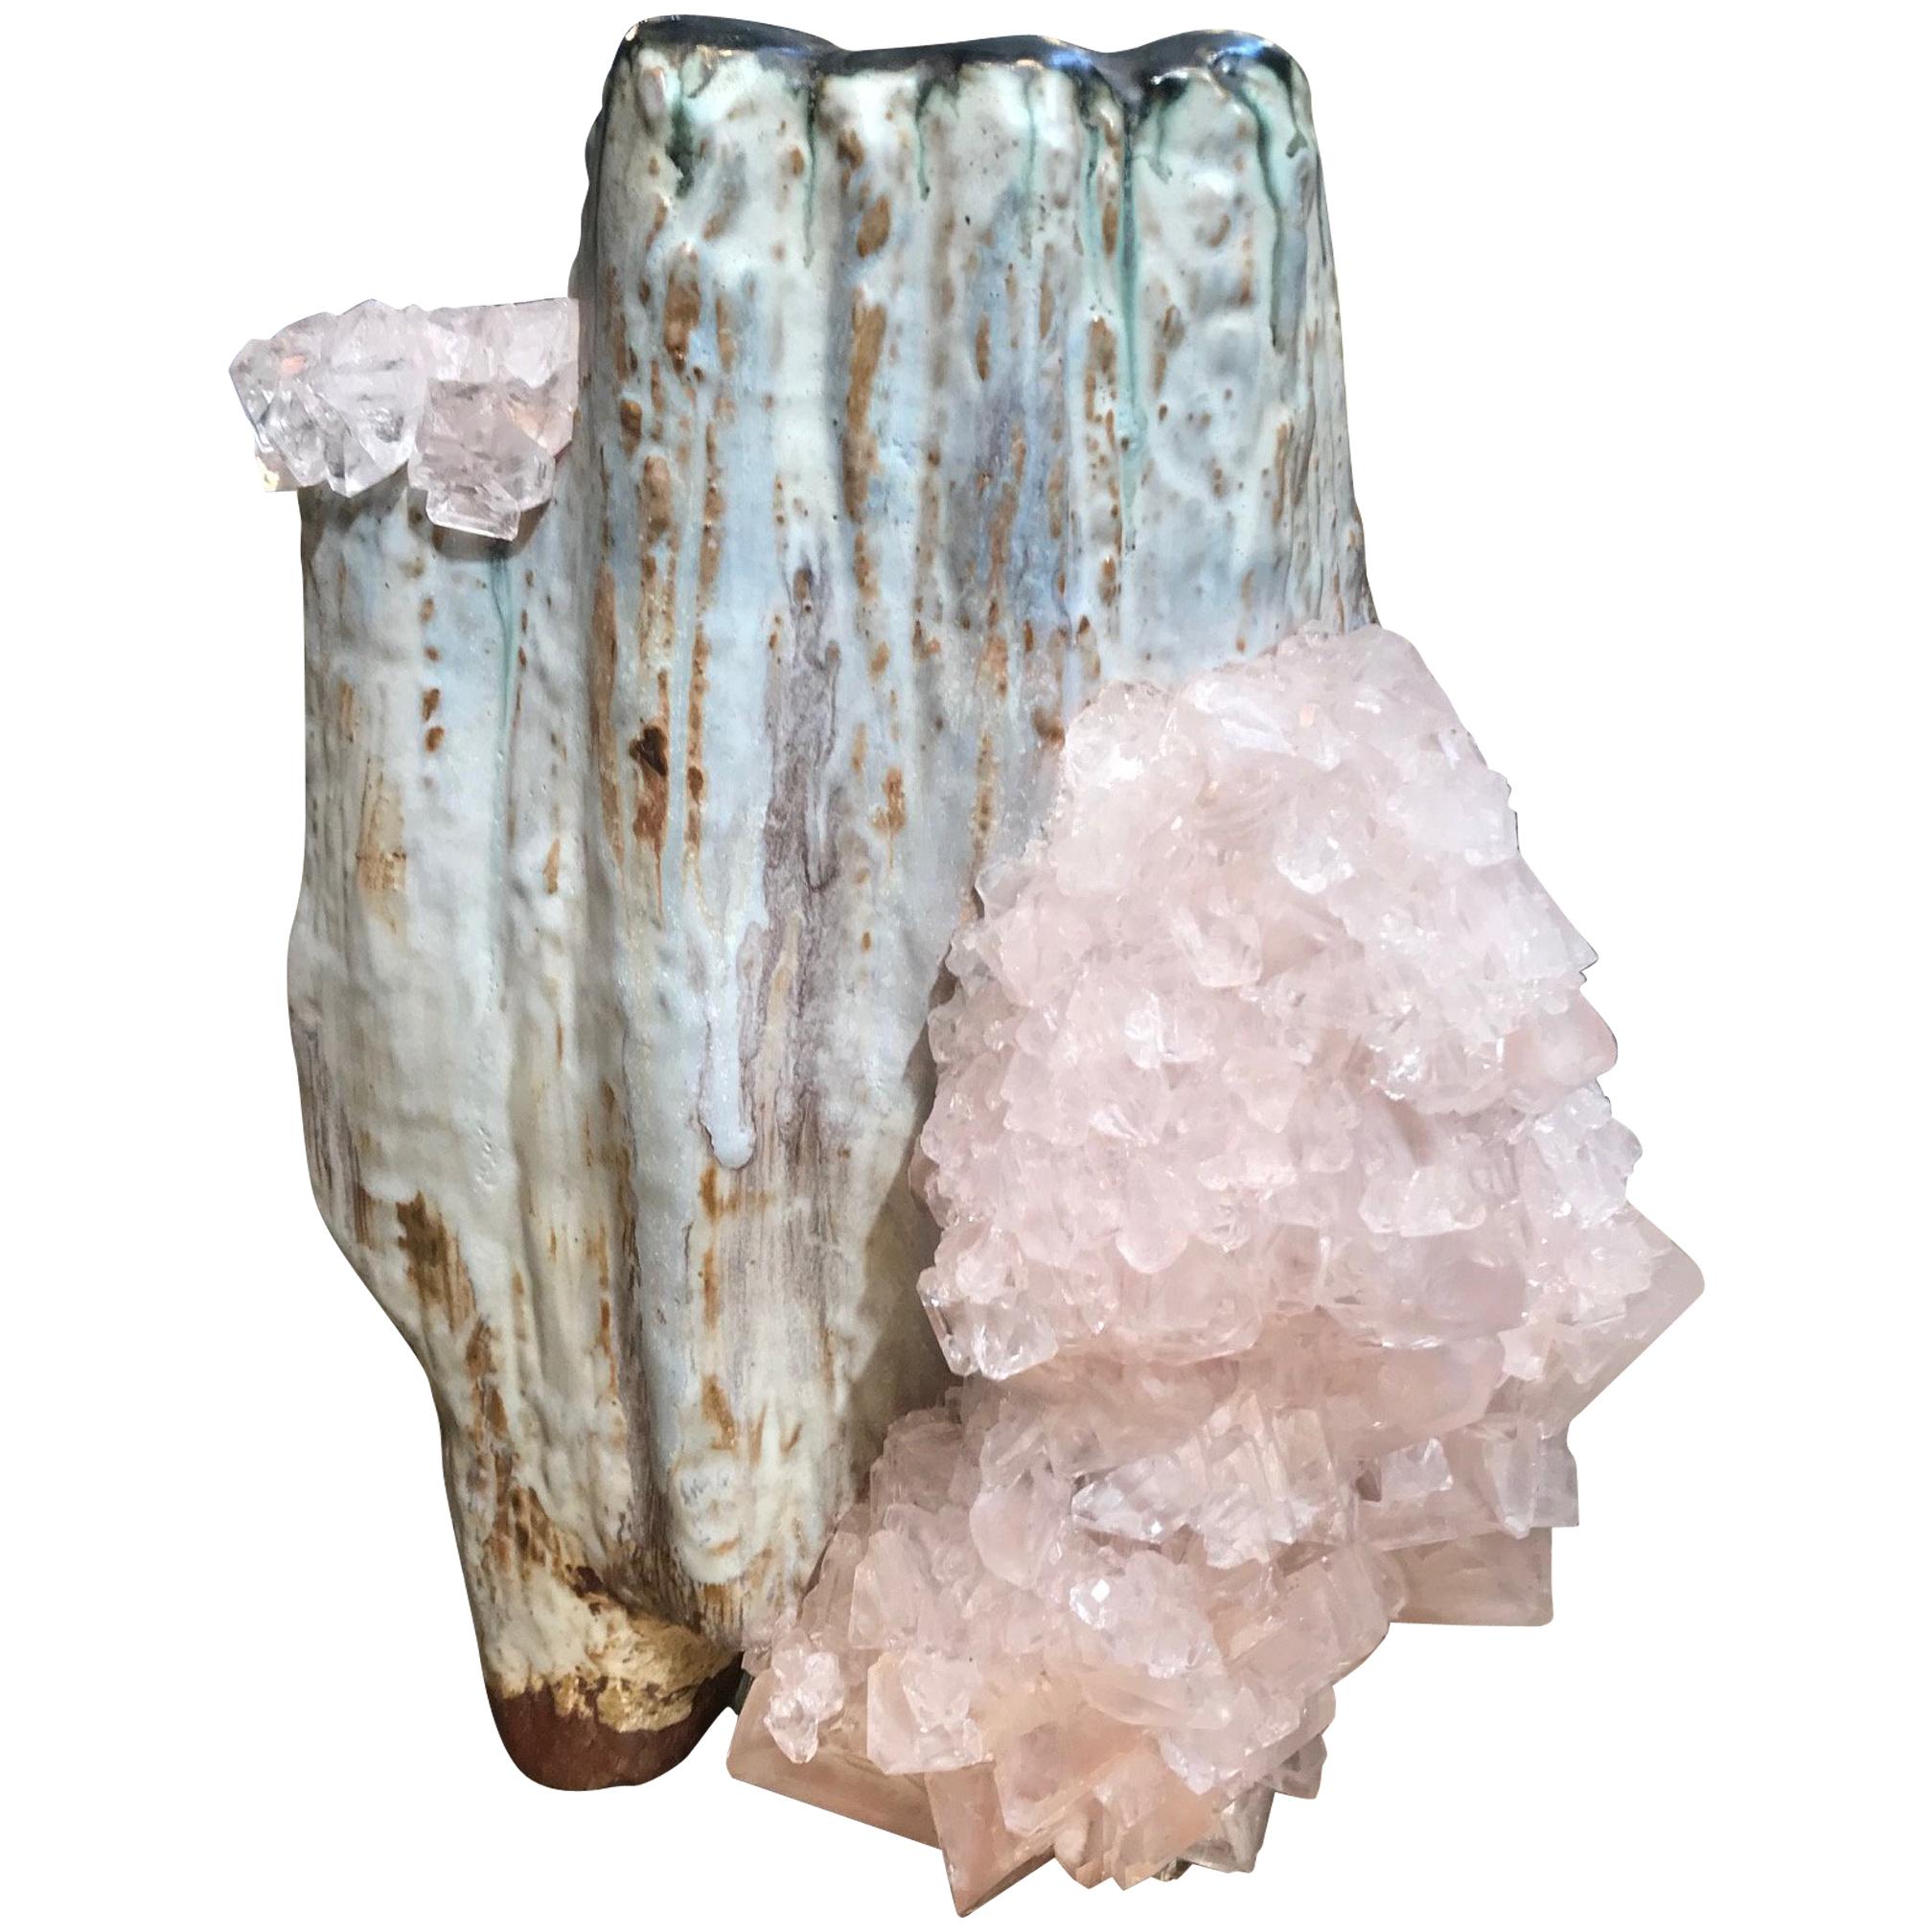 Contemporary Ceramic Vase with Pink Salt Crystals by Lukas Wegwerth For Sale